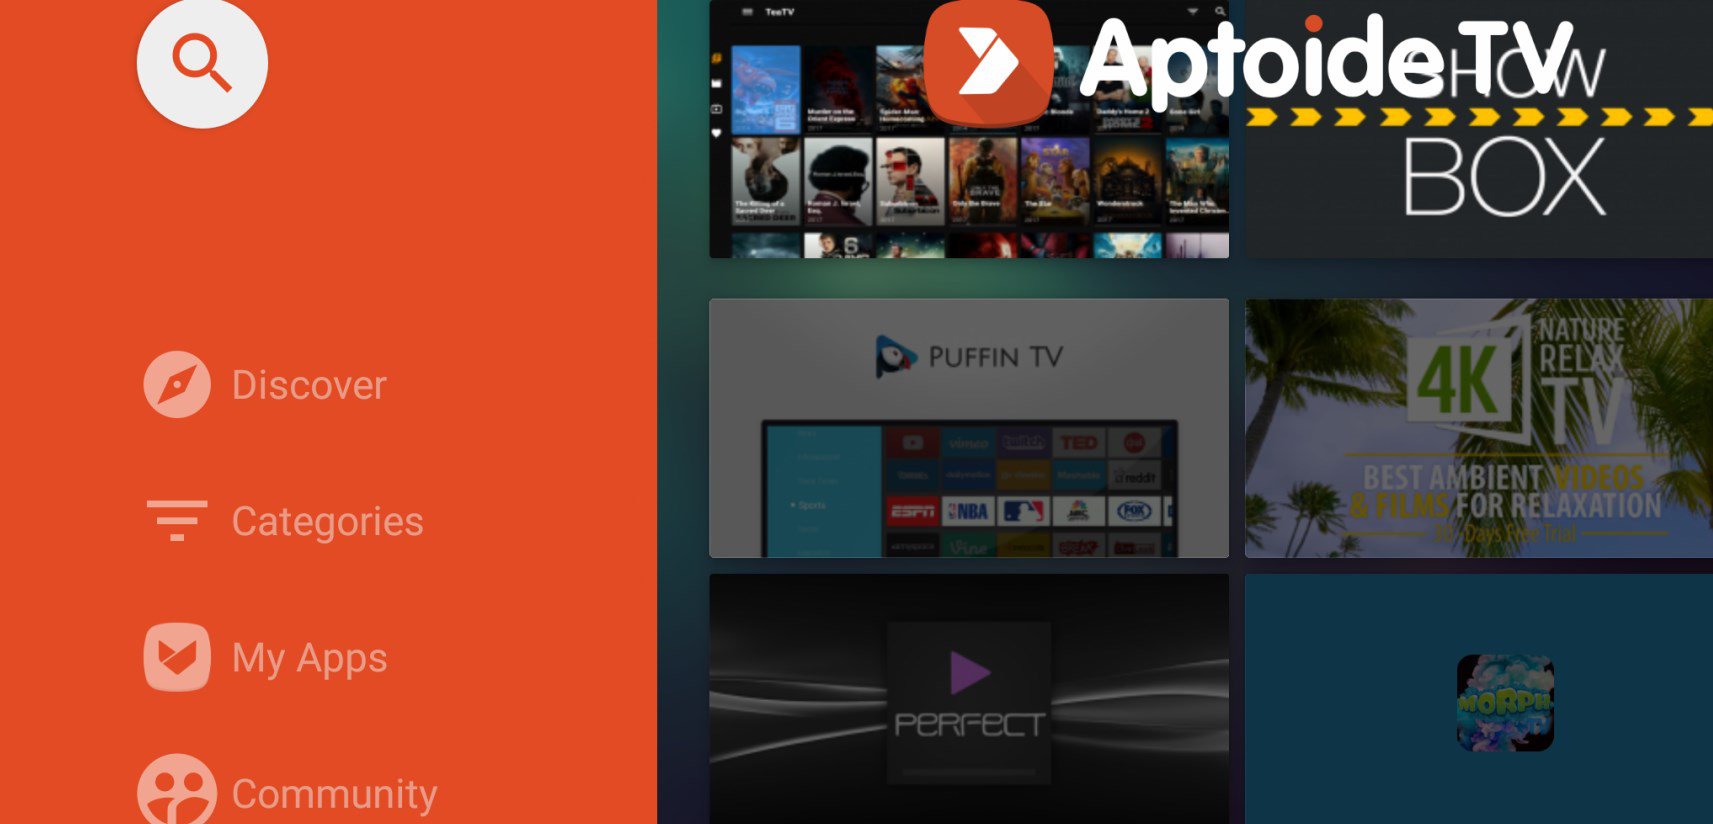 Apk file download for android tv